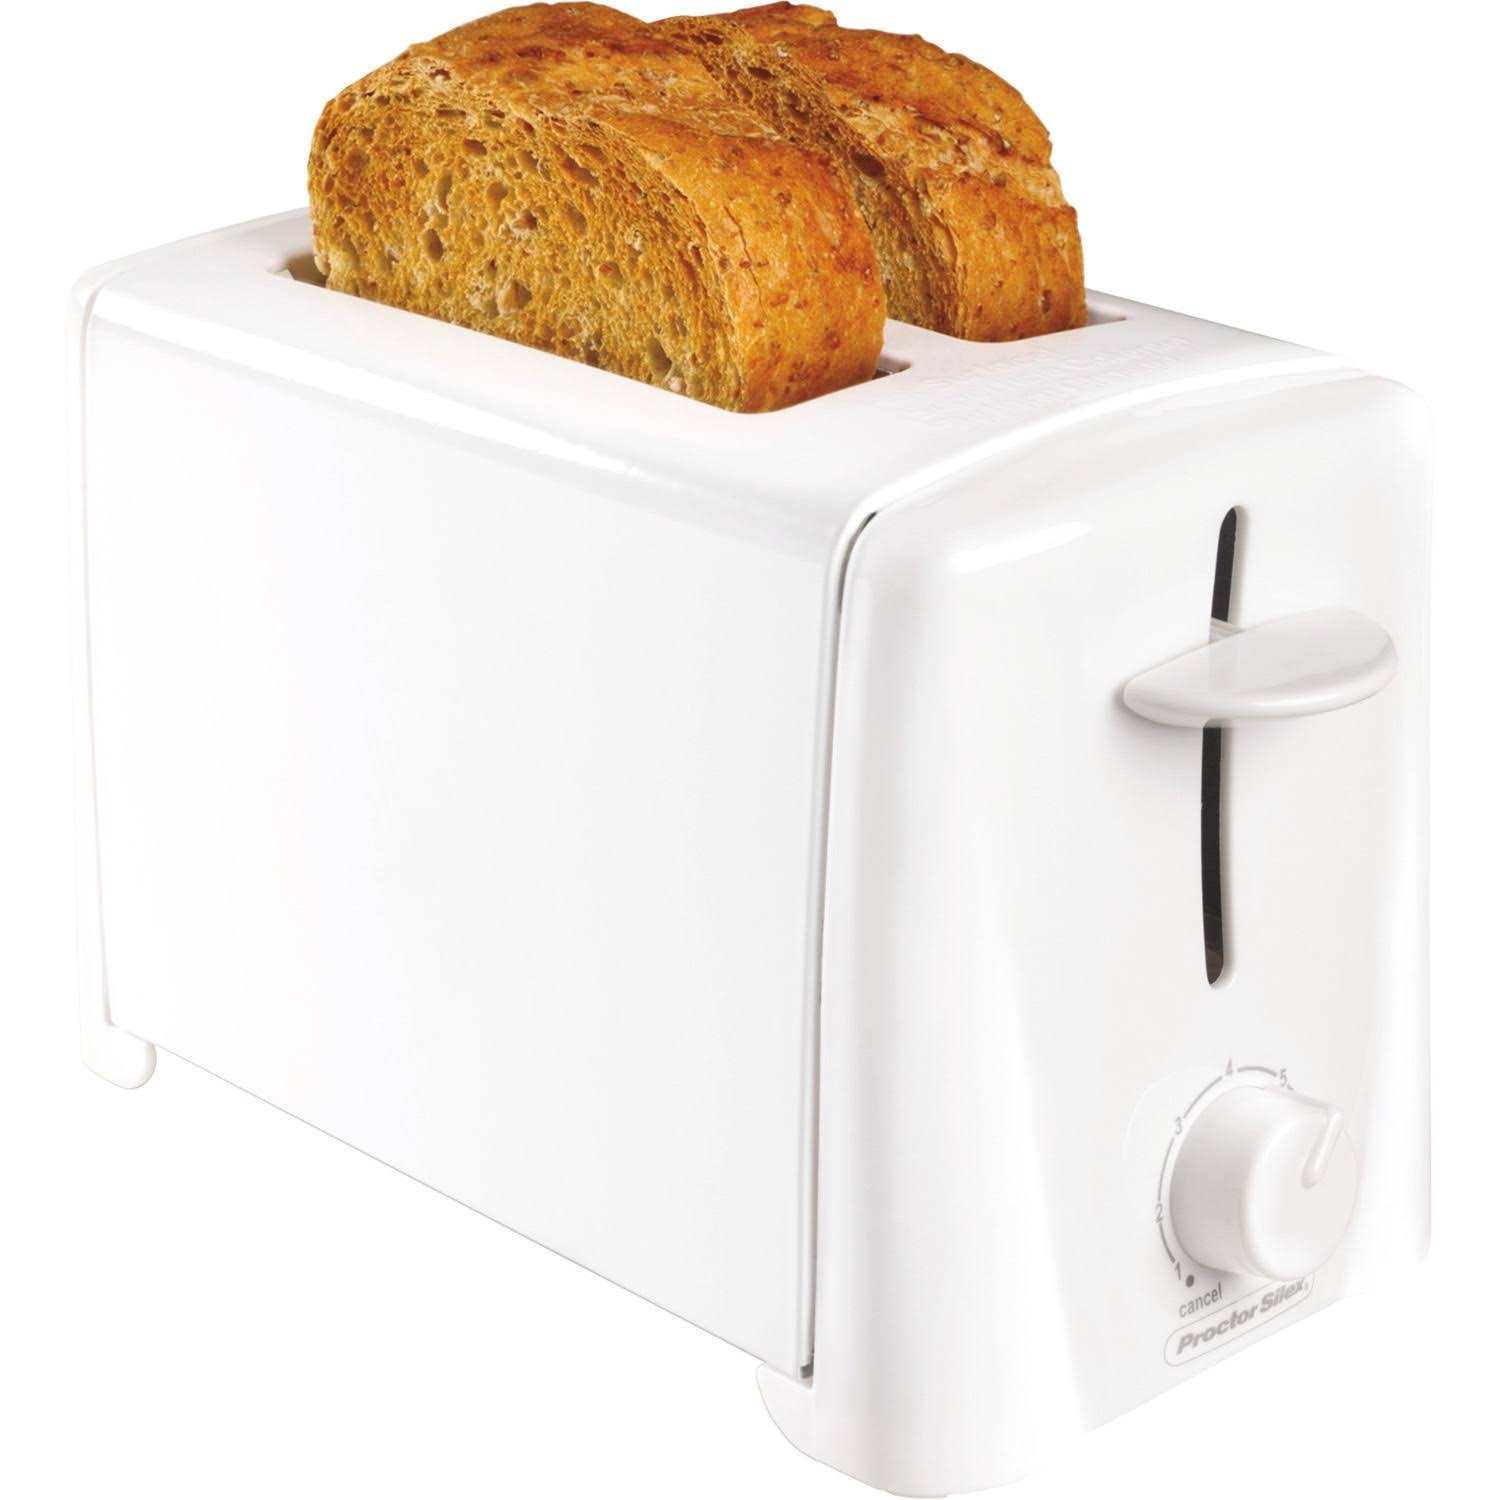 Silex 2 Slice Cool-Wall Toaster